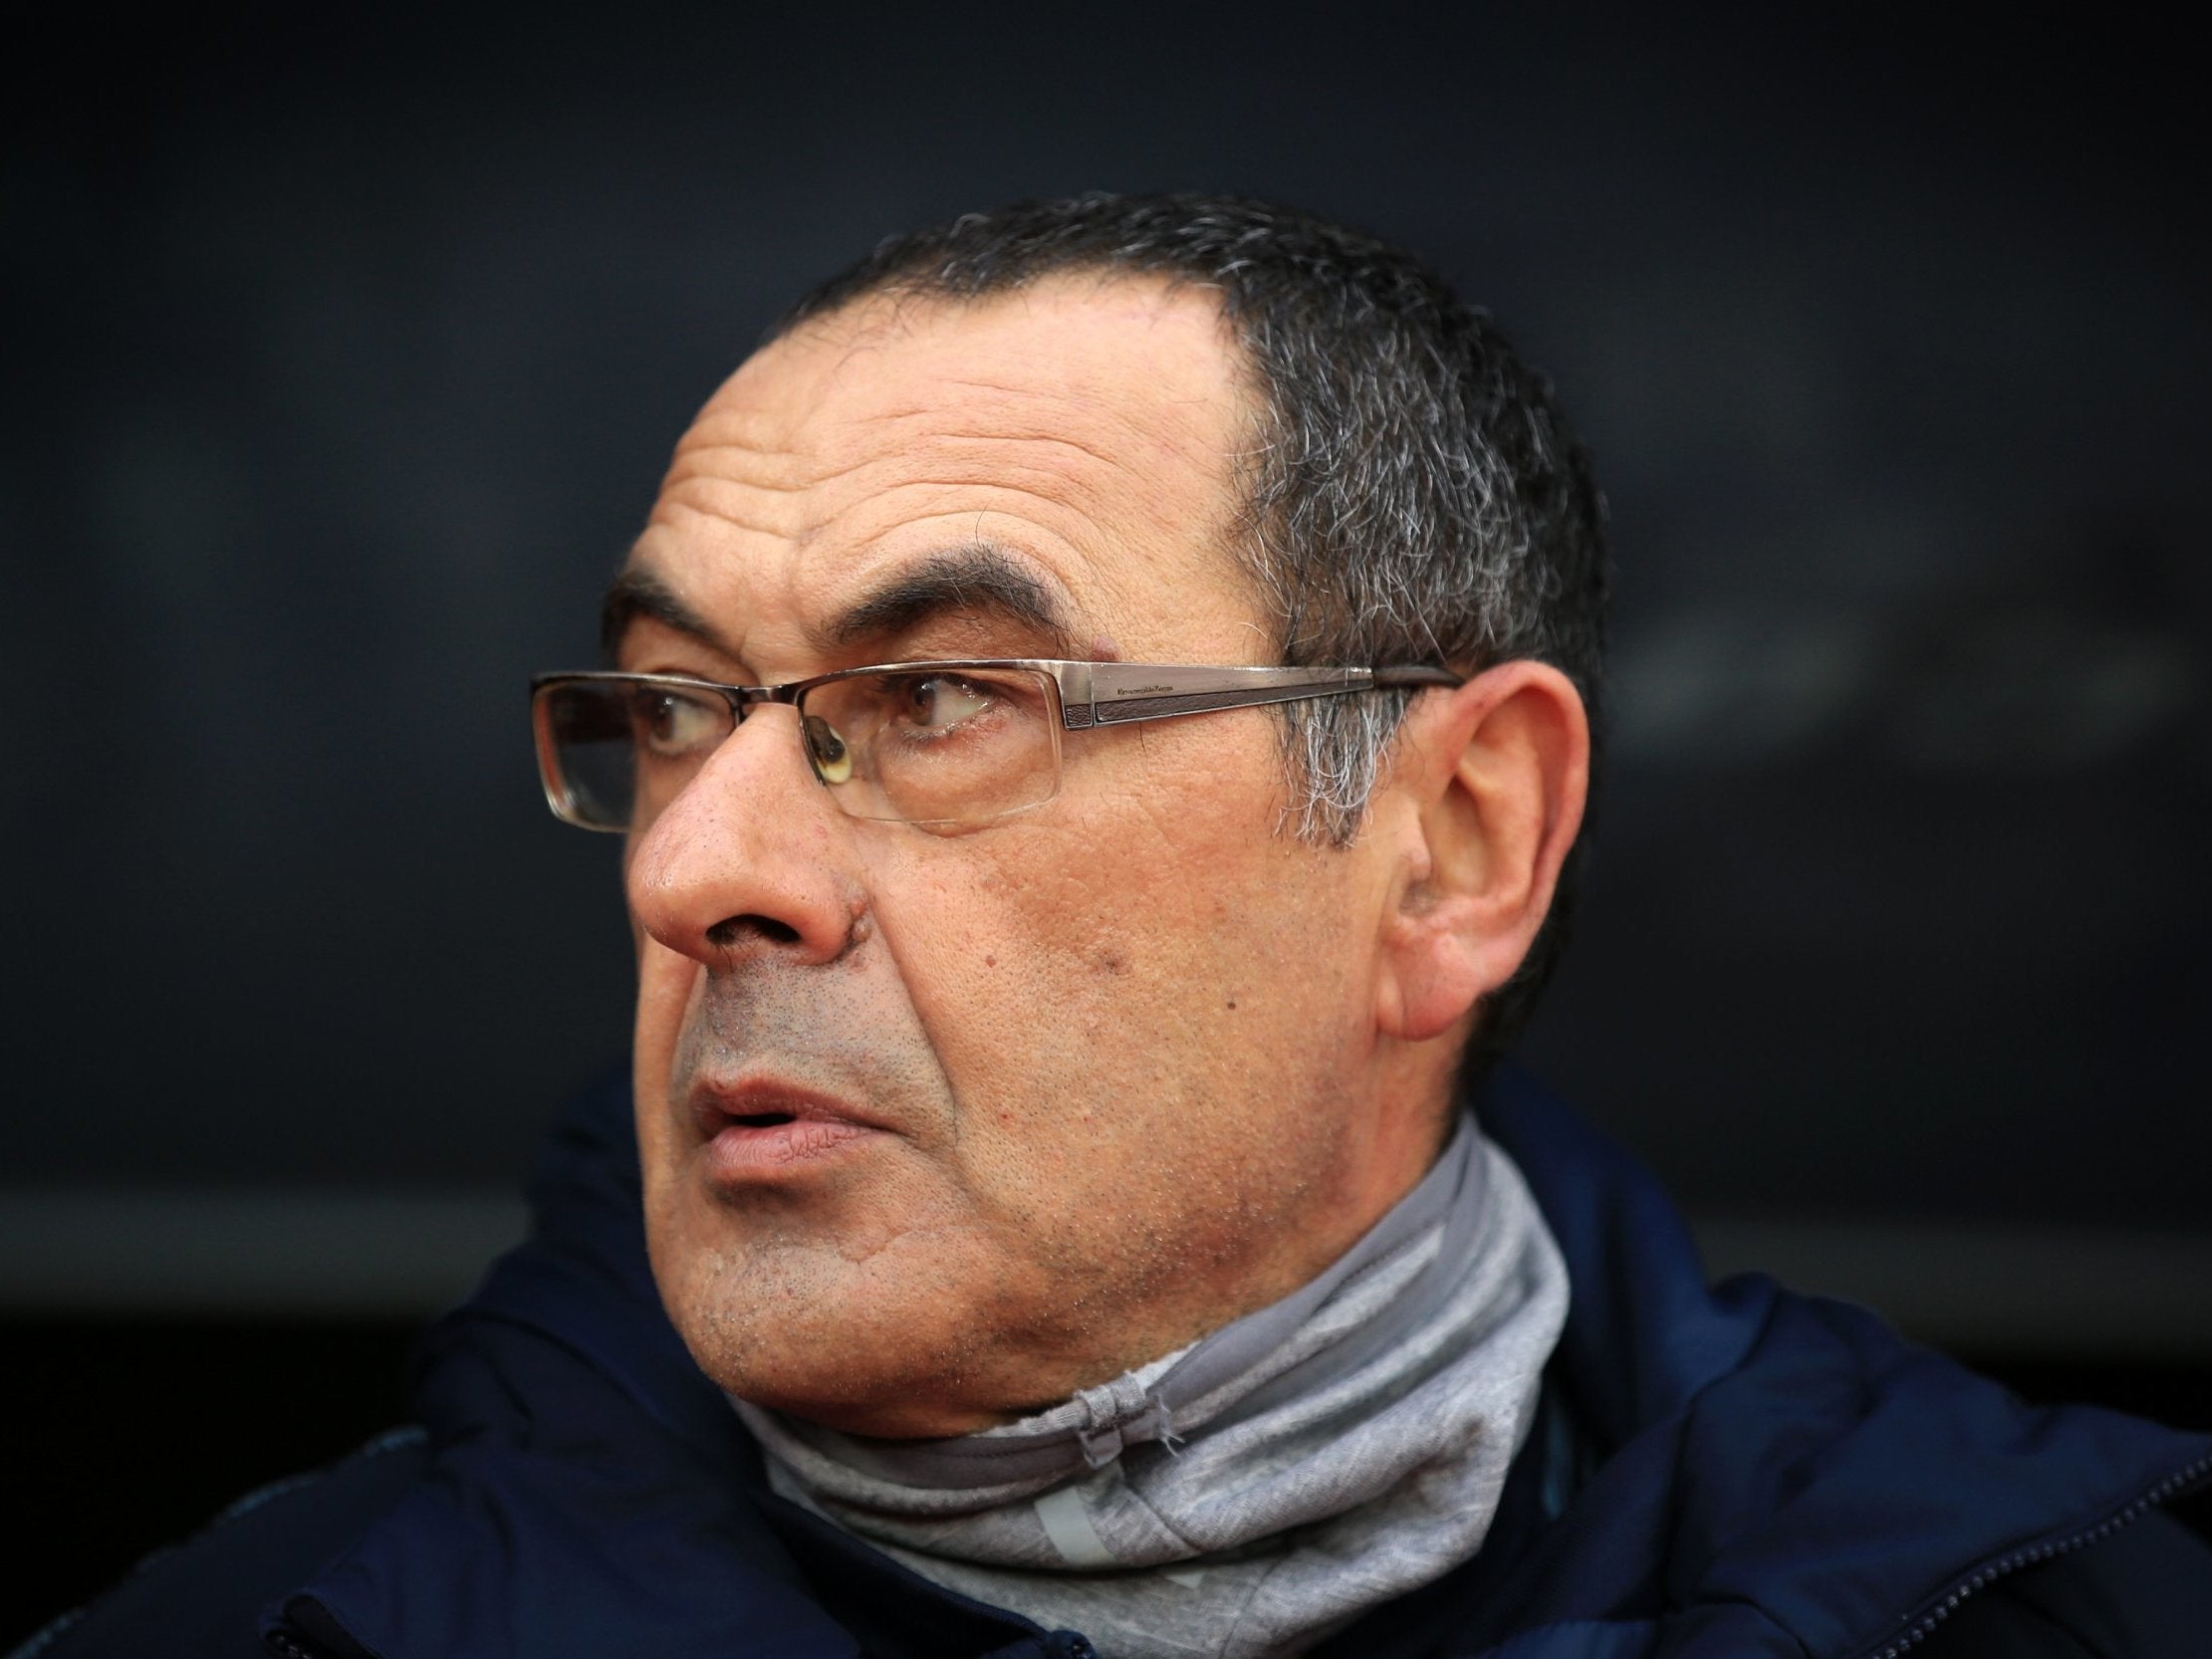 Sarri has urged Chelsea fans not to sing derogatory chants against Spurs on Tuesday